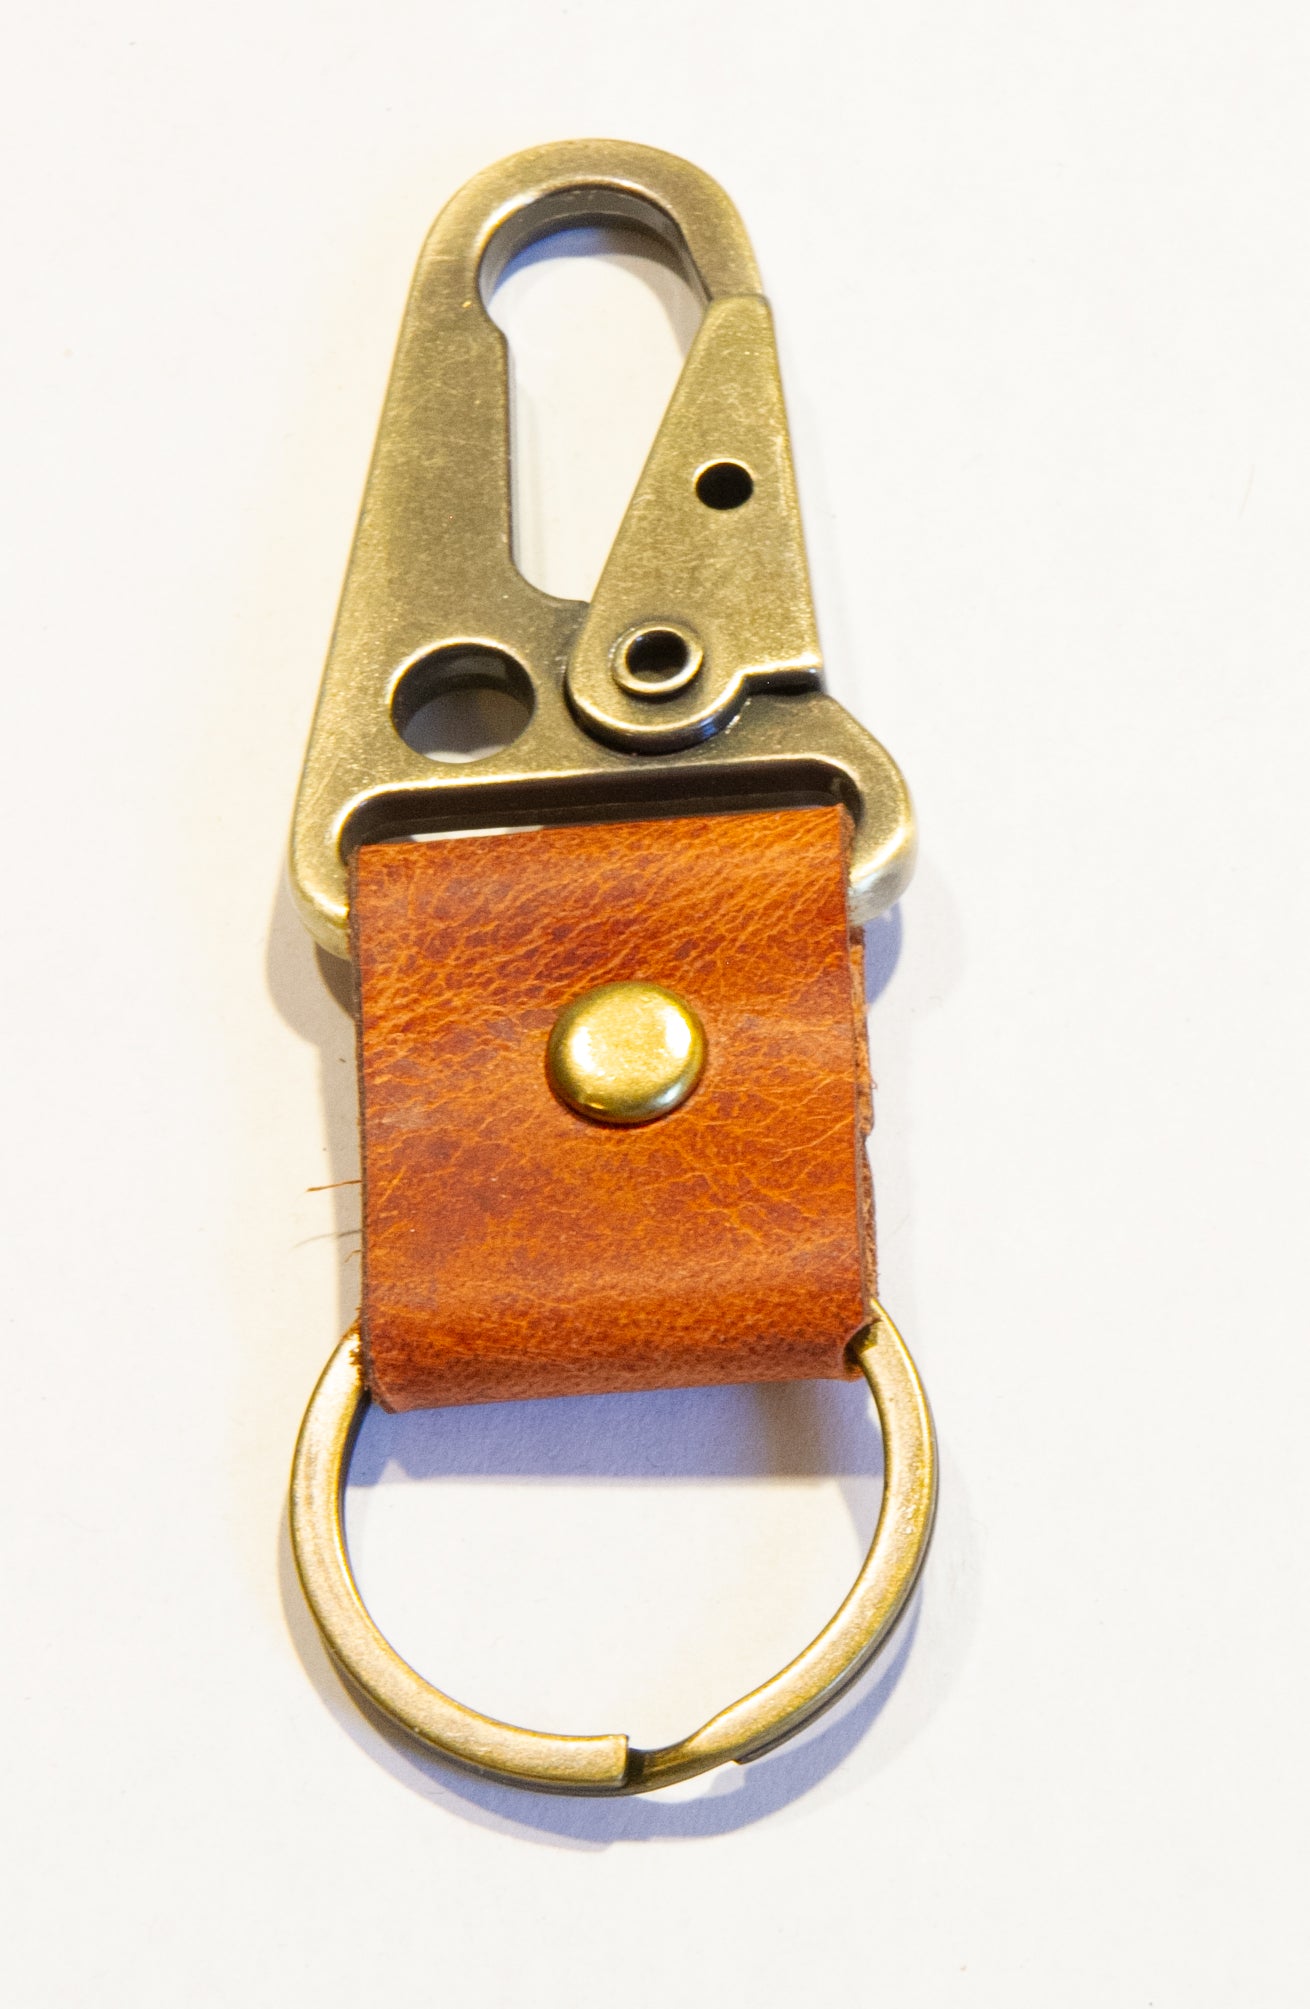 Leather Key Chain with a Bronze colored Rifle Sling Clip and a Bronze Colored Key Ring